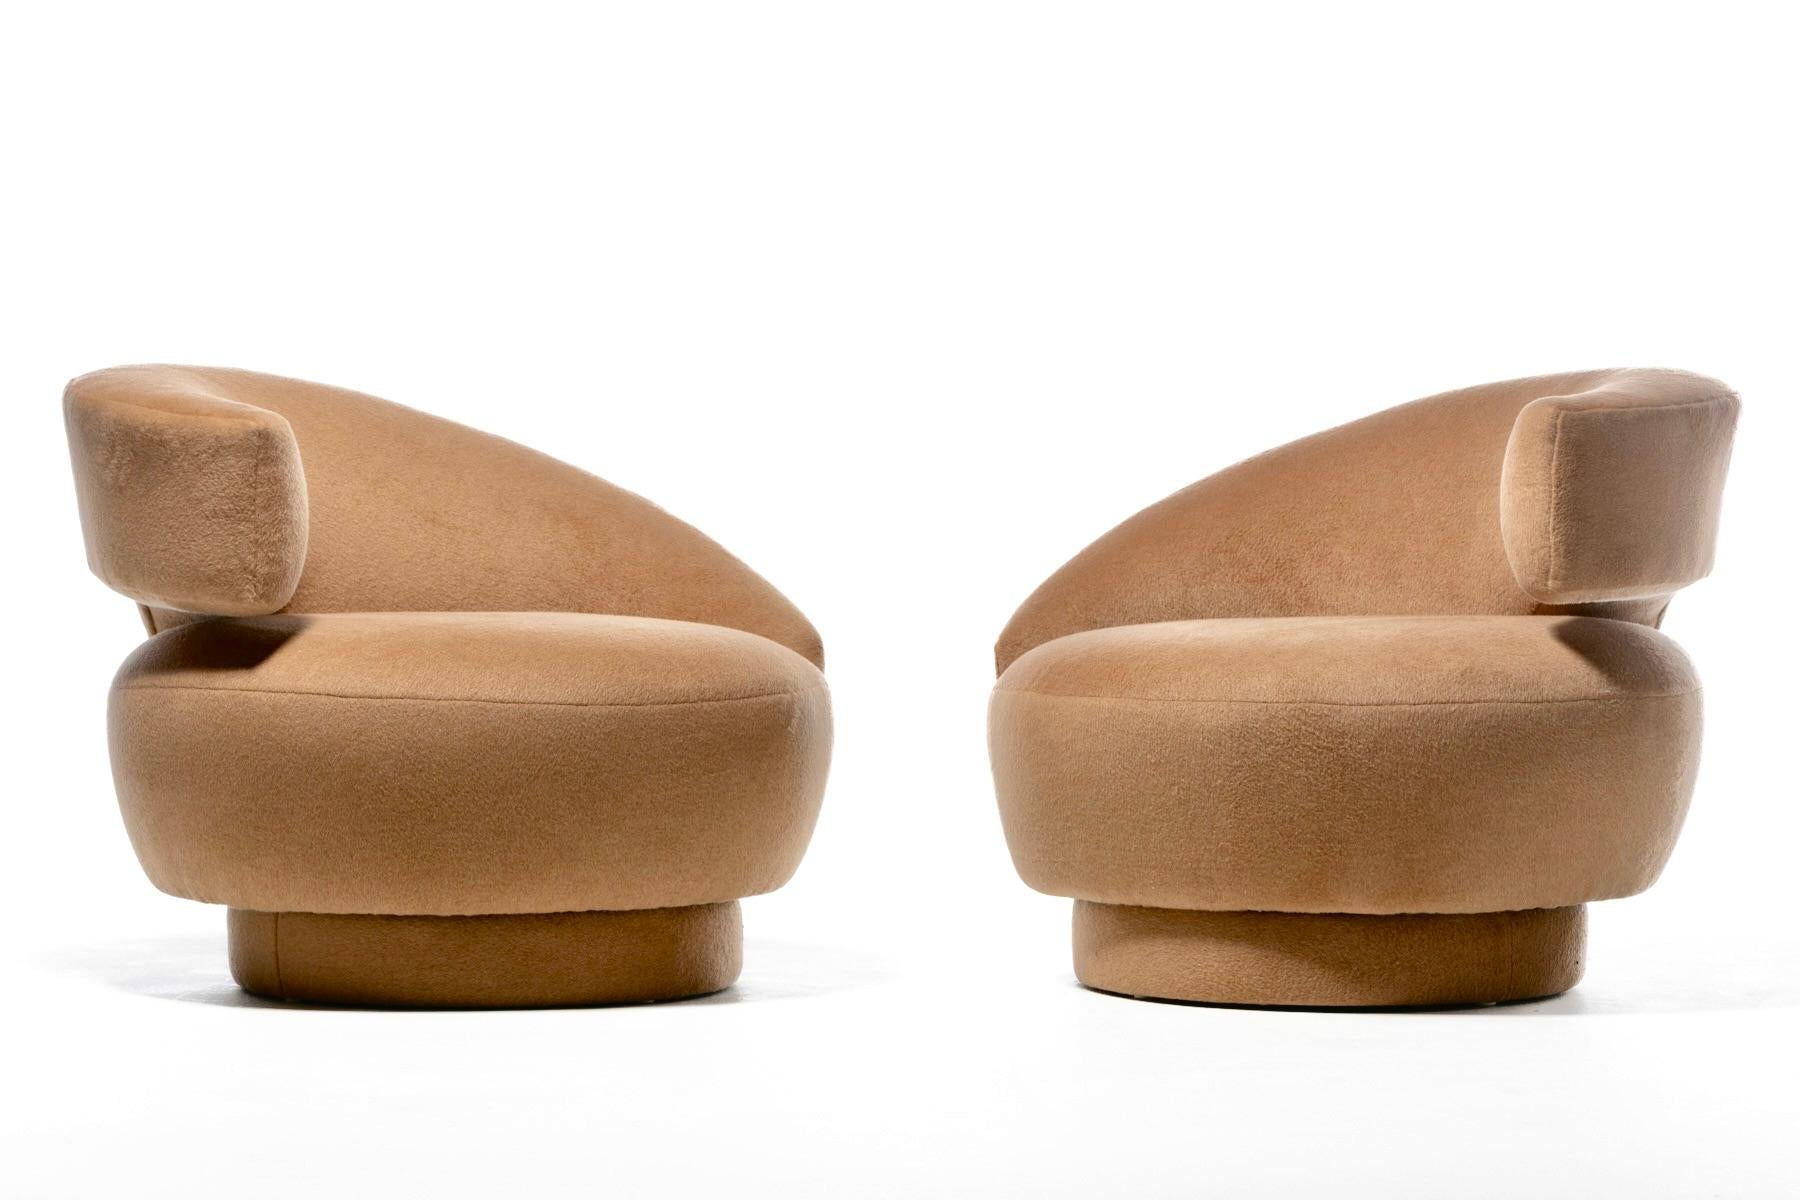 Contemporary Vladimir Kagan Caterpillar Chairs Newly Upholstered in Camel Color Mohair For Sale